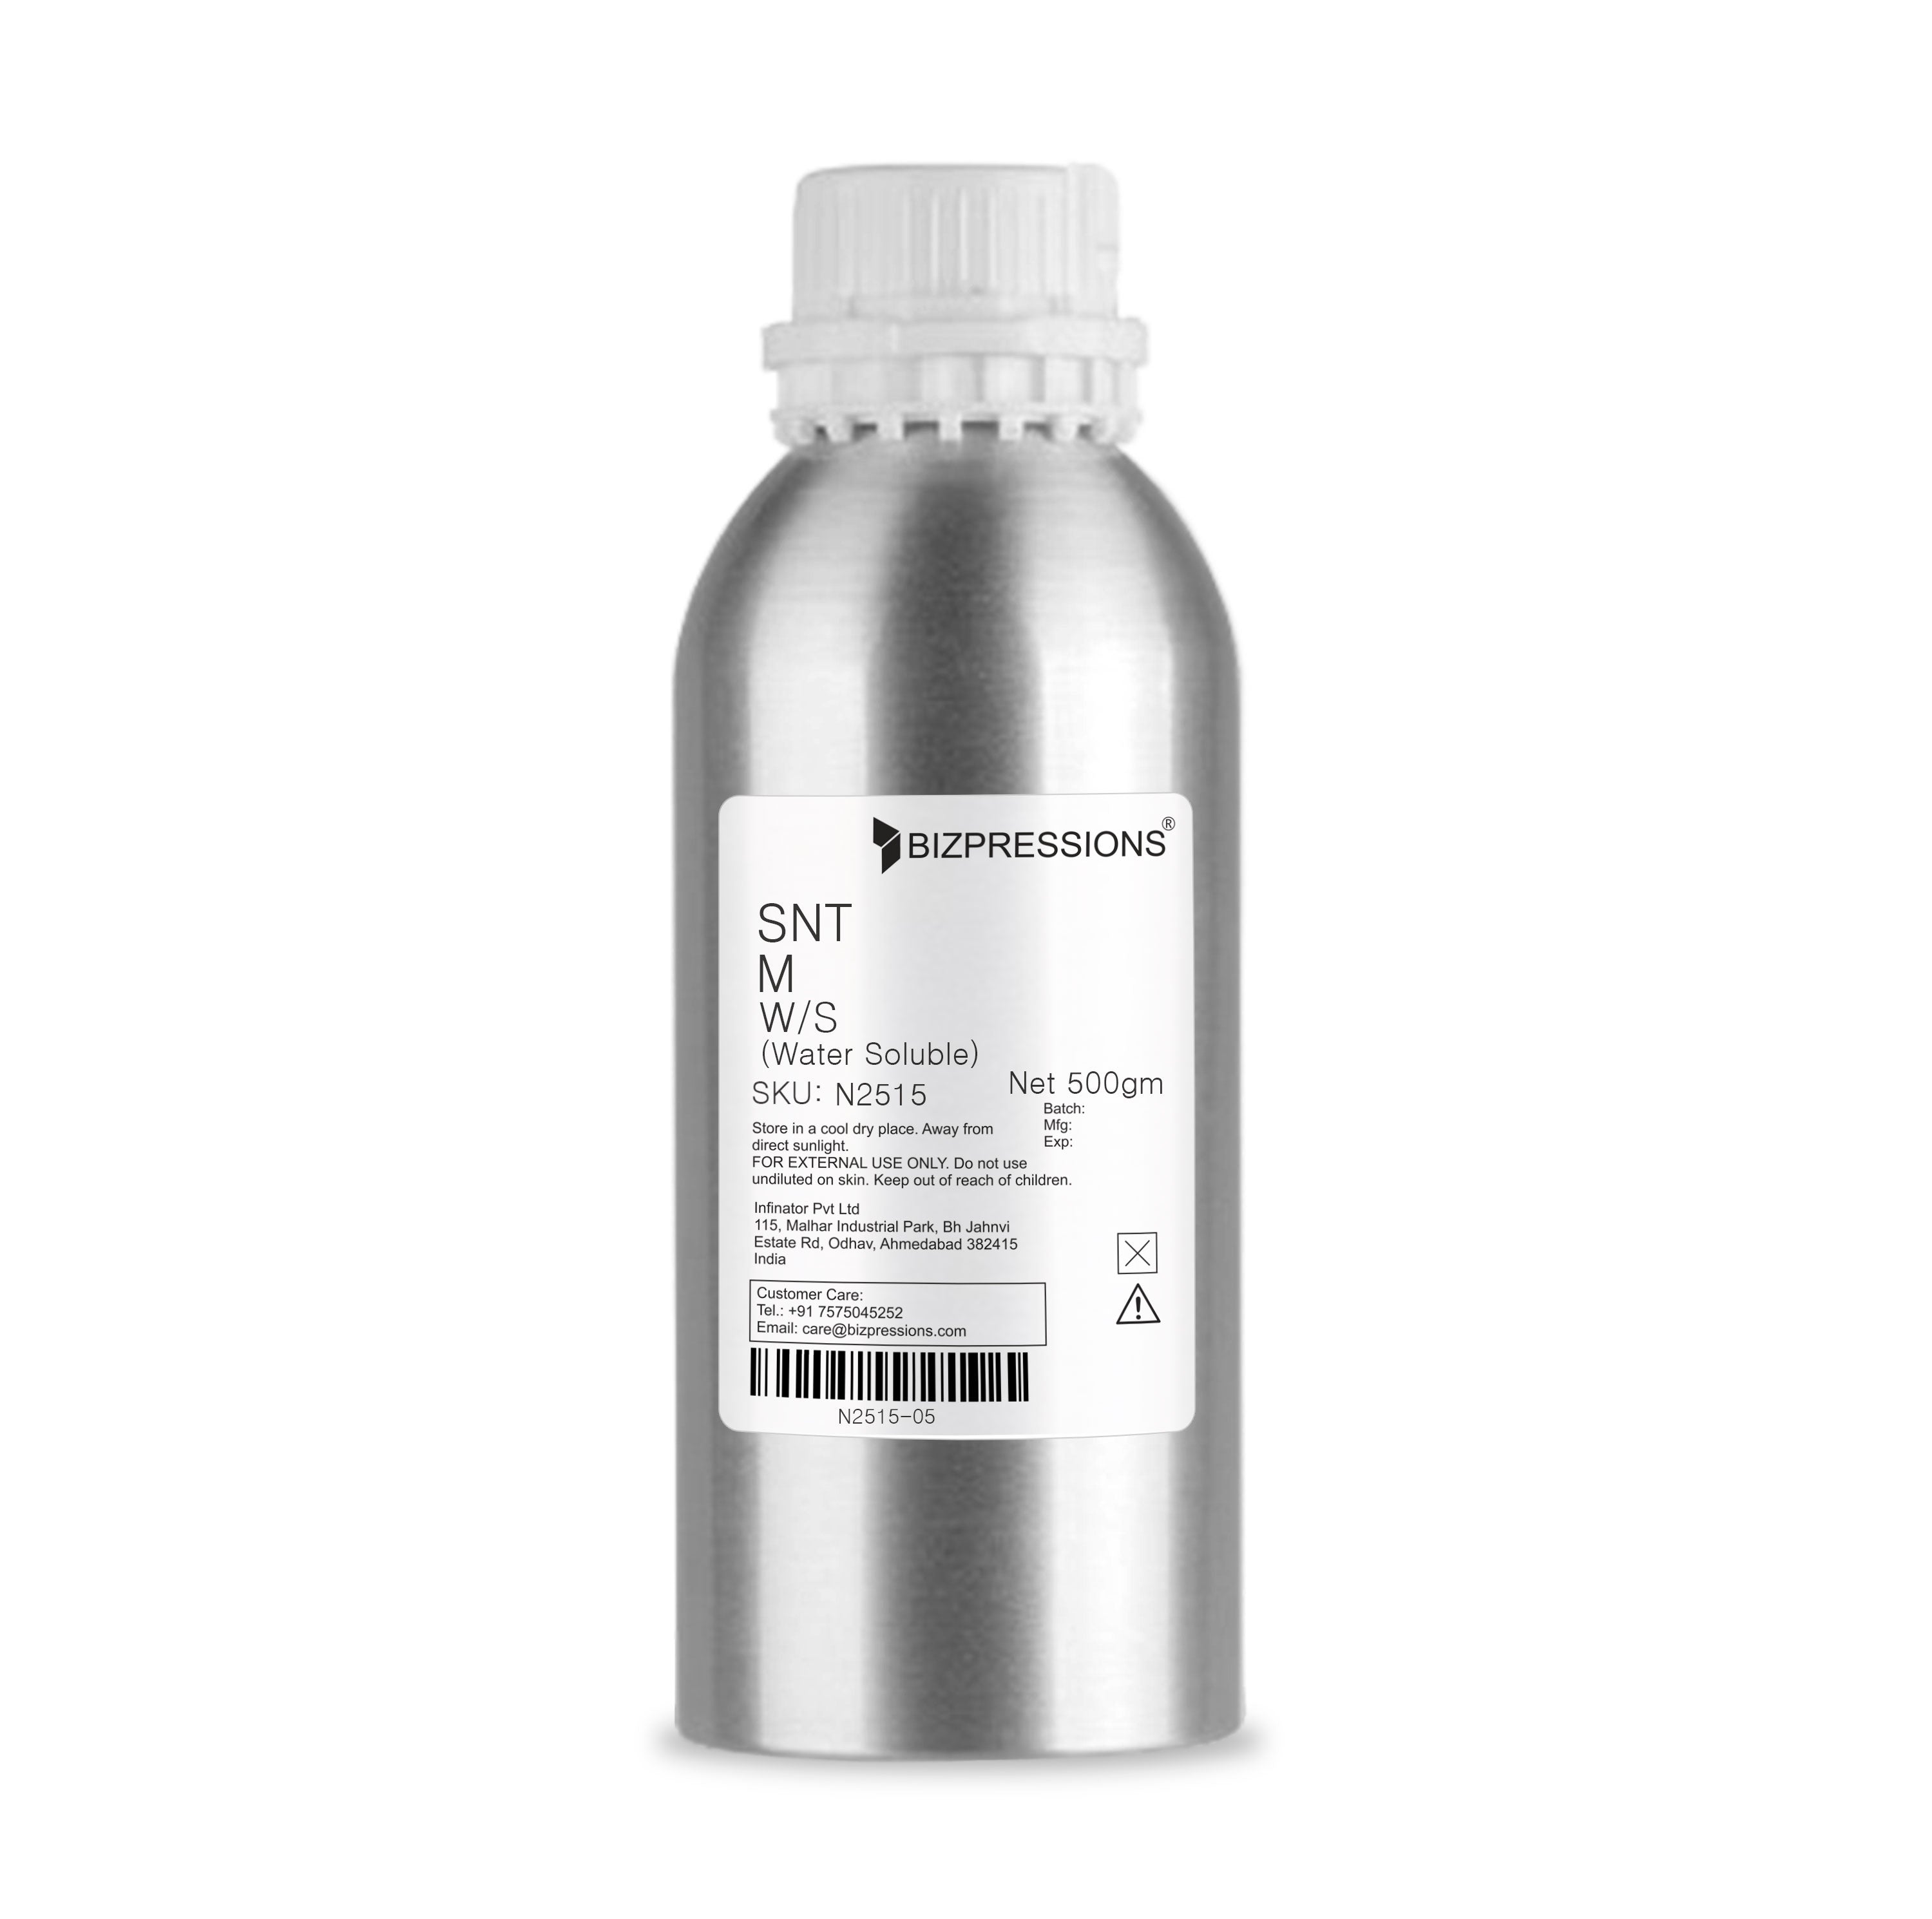 SNT - M W/S - Fragrance (Water Soluble)